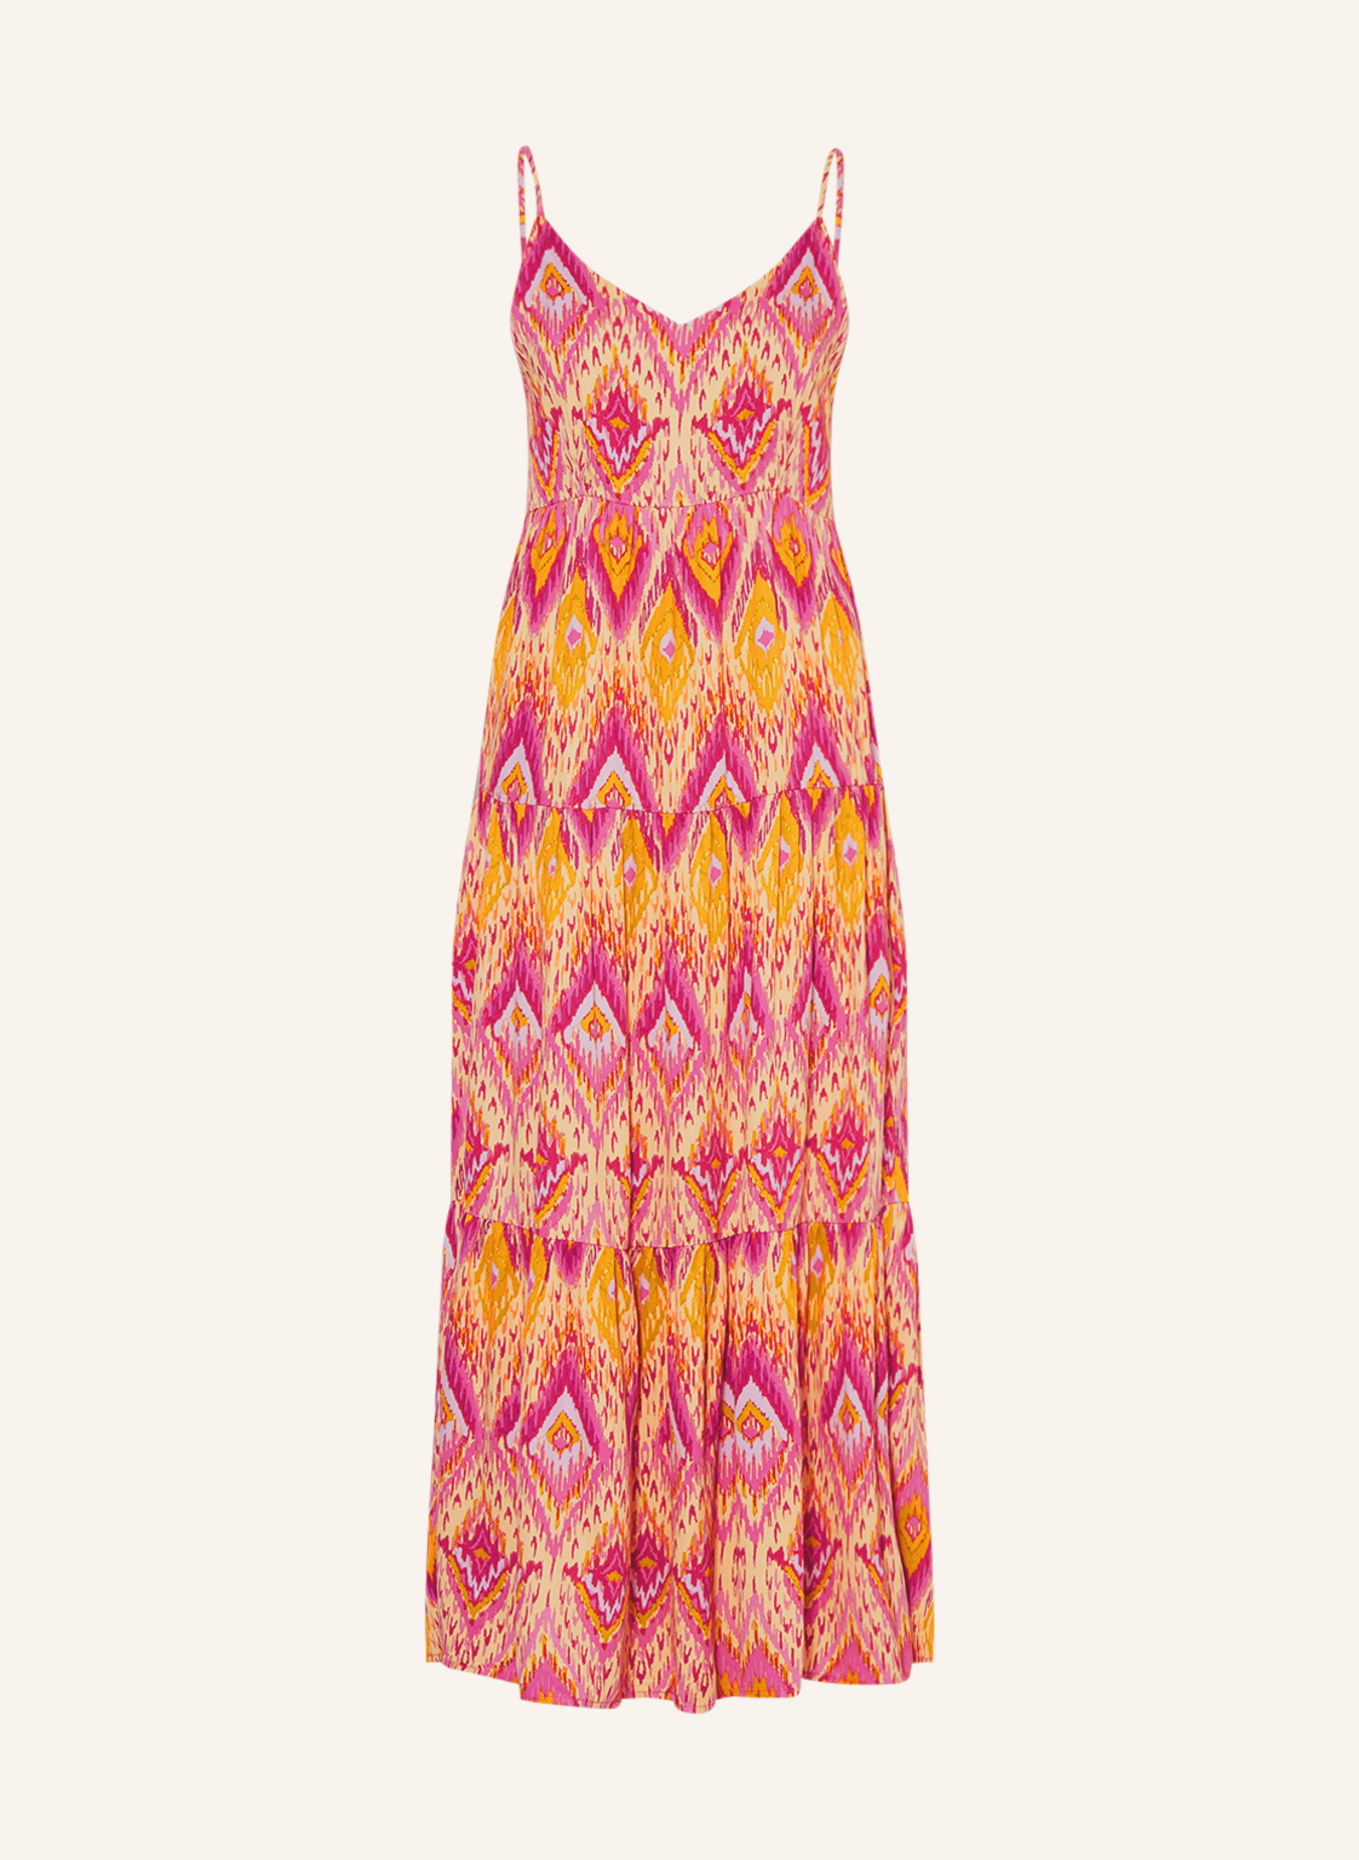 ONLY Dress, Color: ORANGE/ PINK/ LIGHT YELLOW (Image 1)